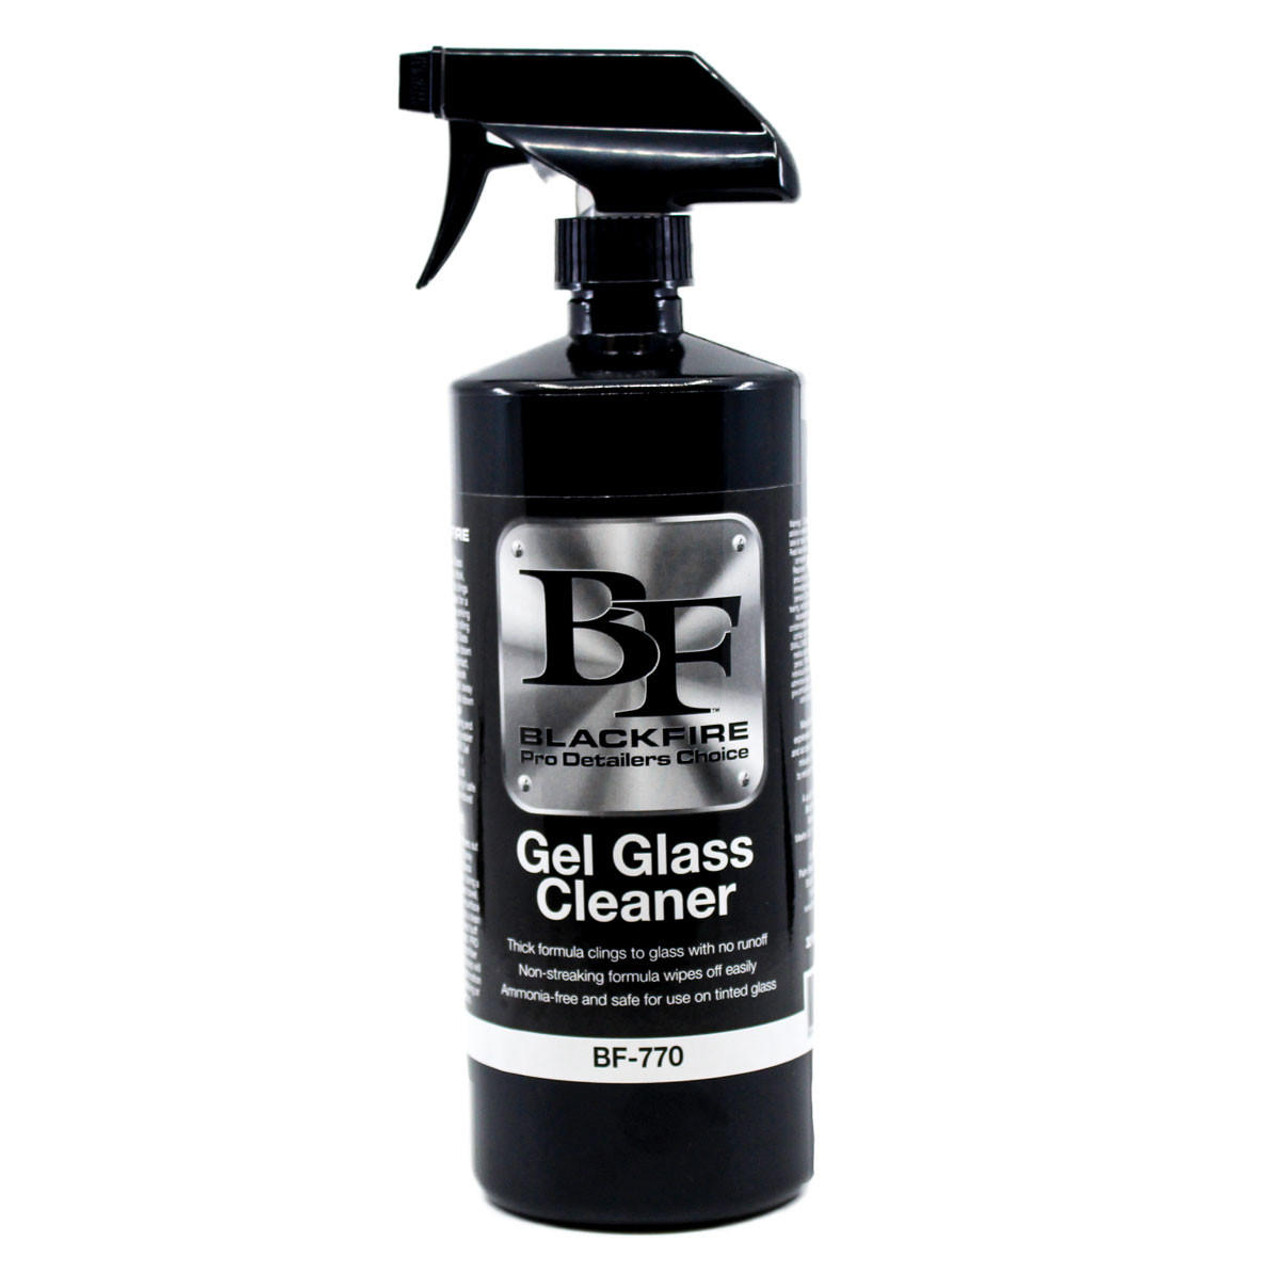 Buy the BLACKFIRE Gel Glass Cleaner and..